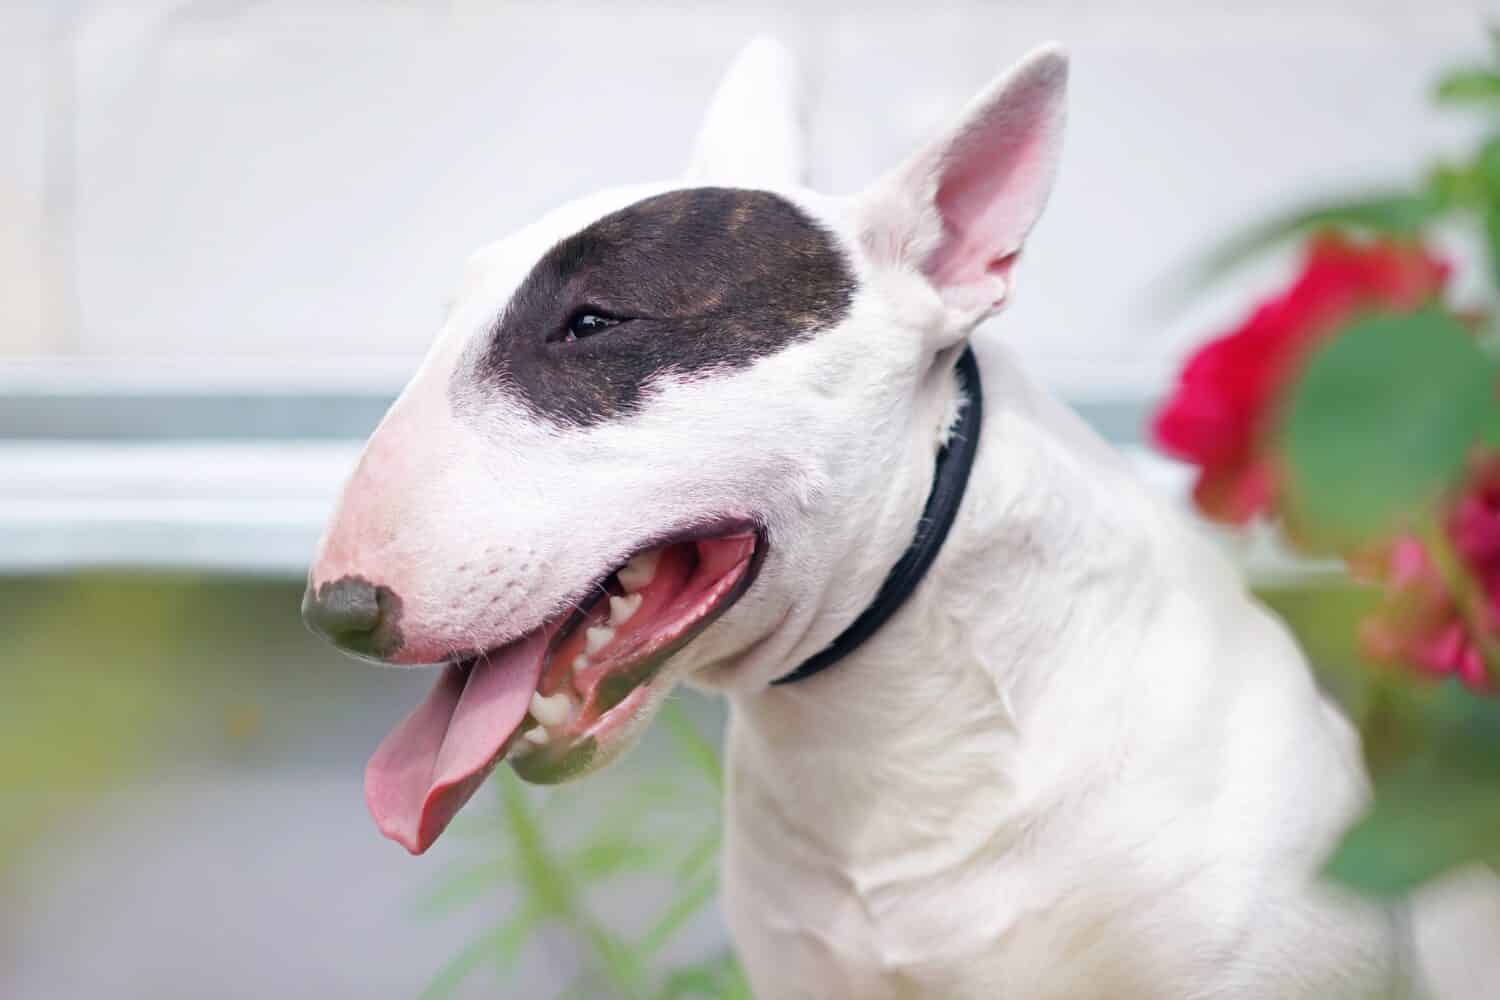 The portrait of a white with a brown patch Miniature Bull Terrier dog with a black collar posing outdoors in summer